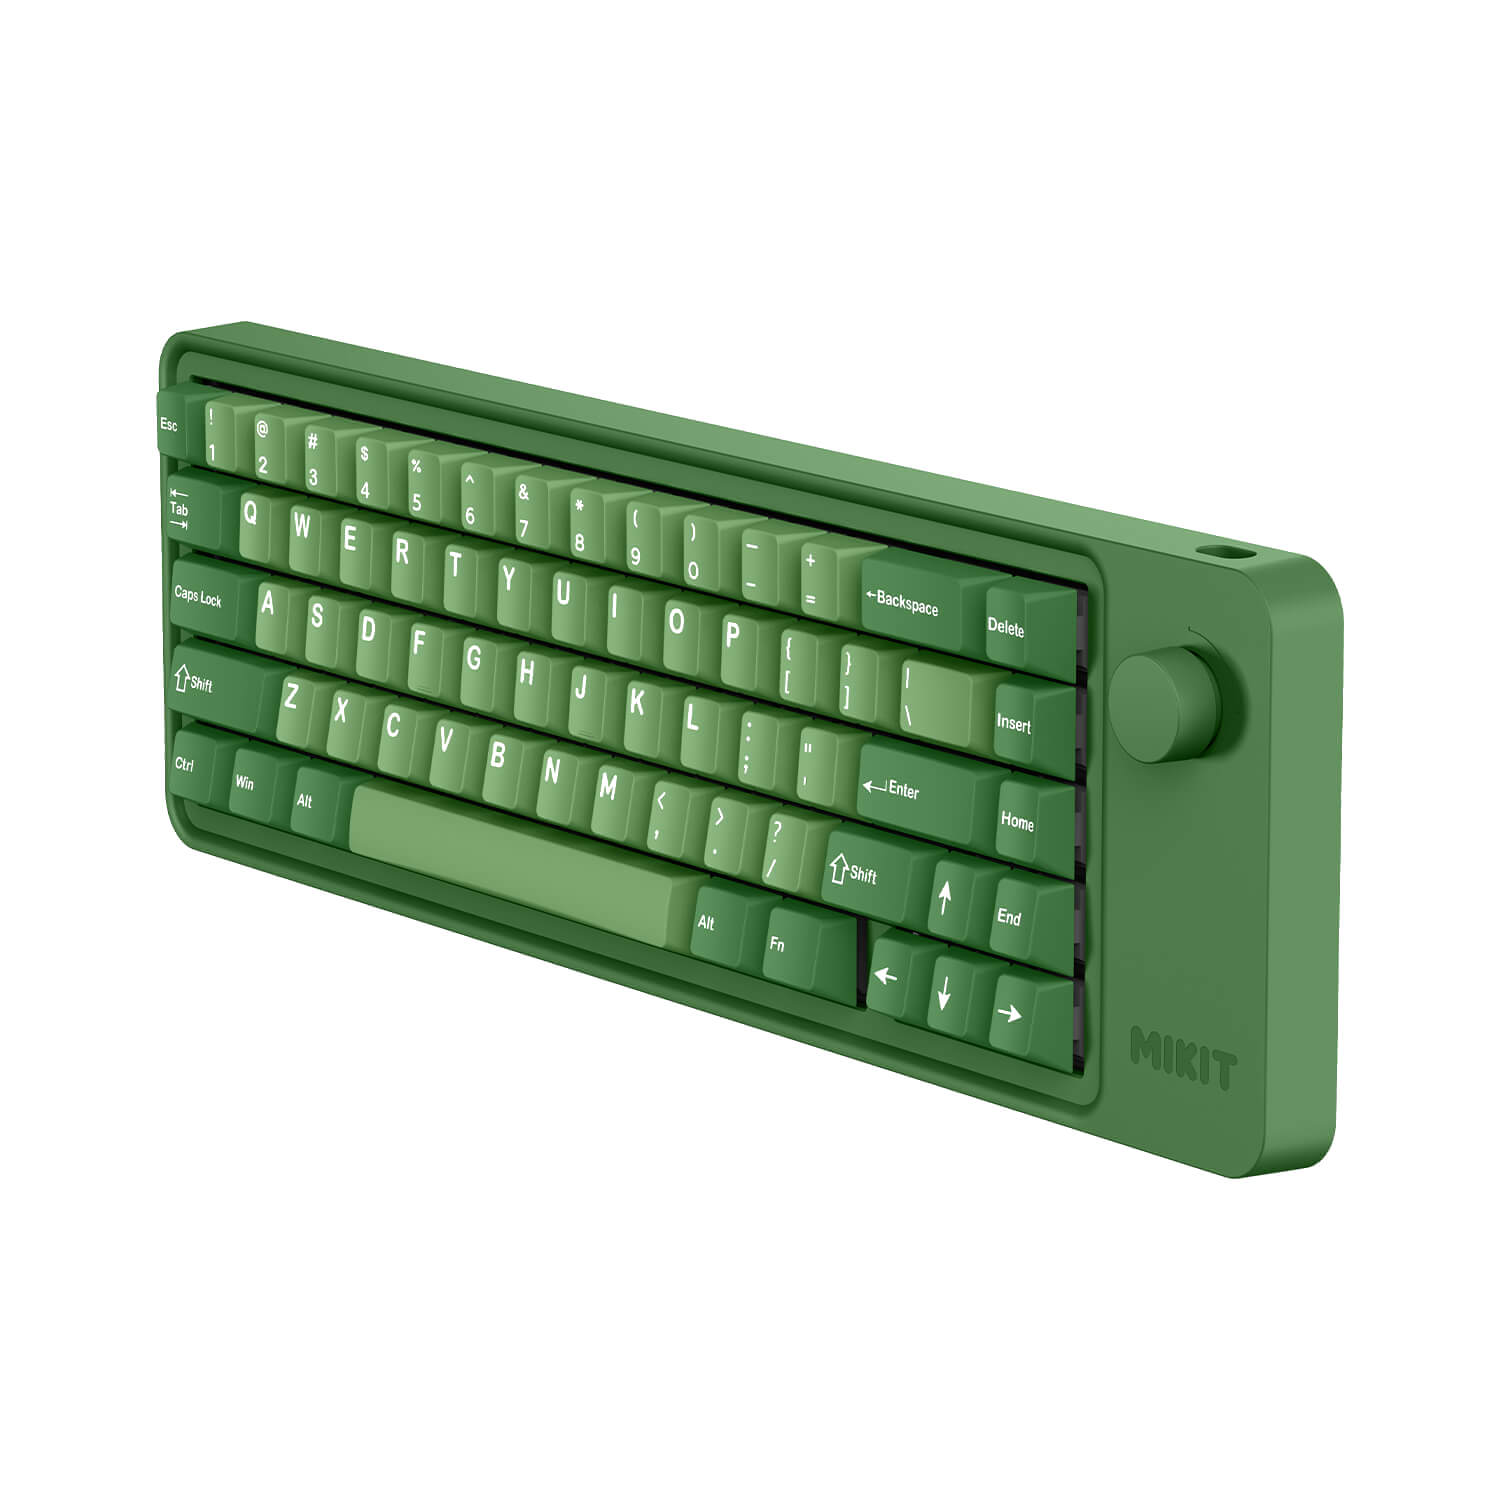 65% compact keyboard with multi-media knob